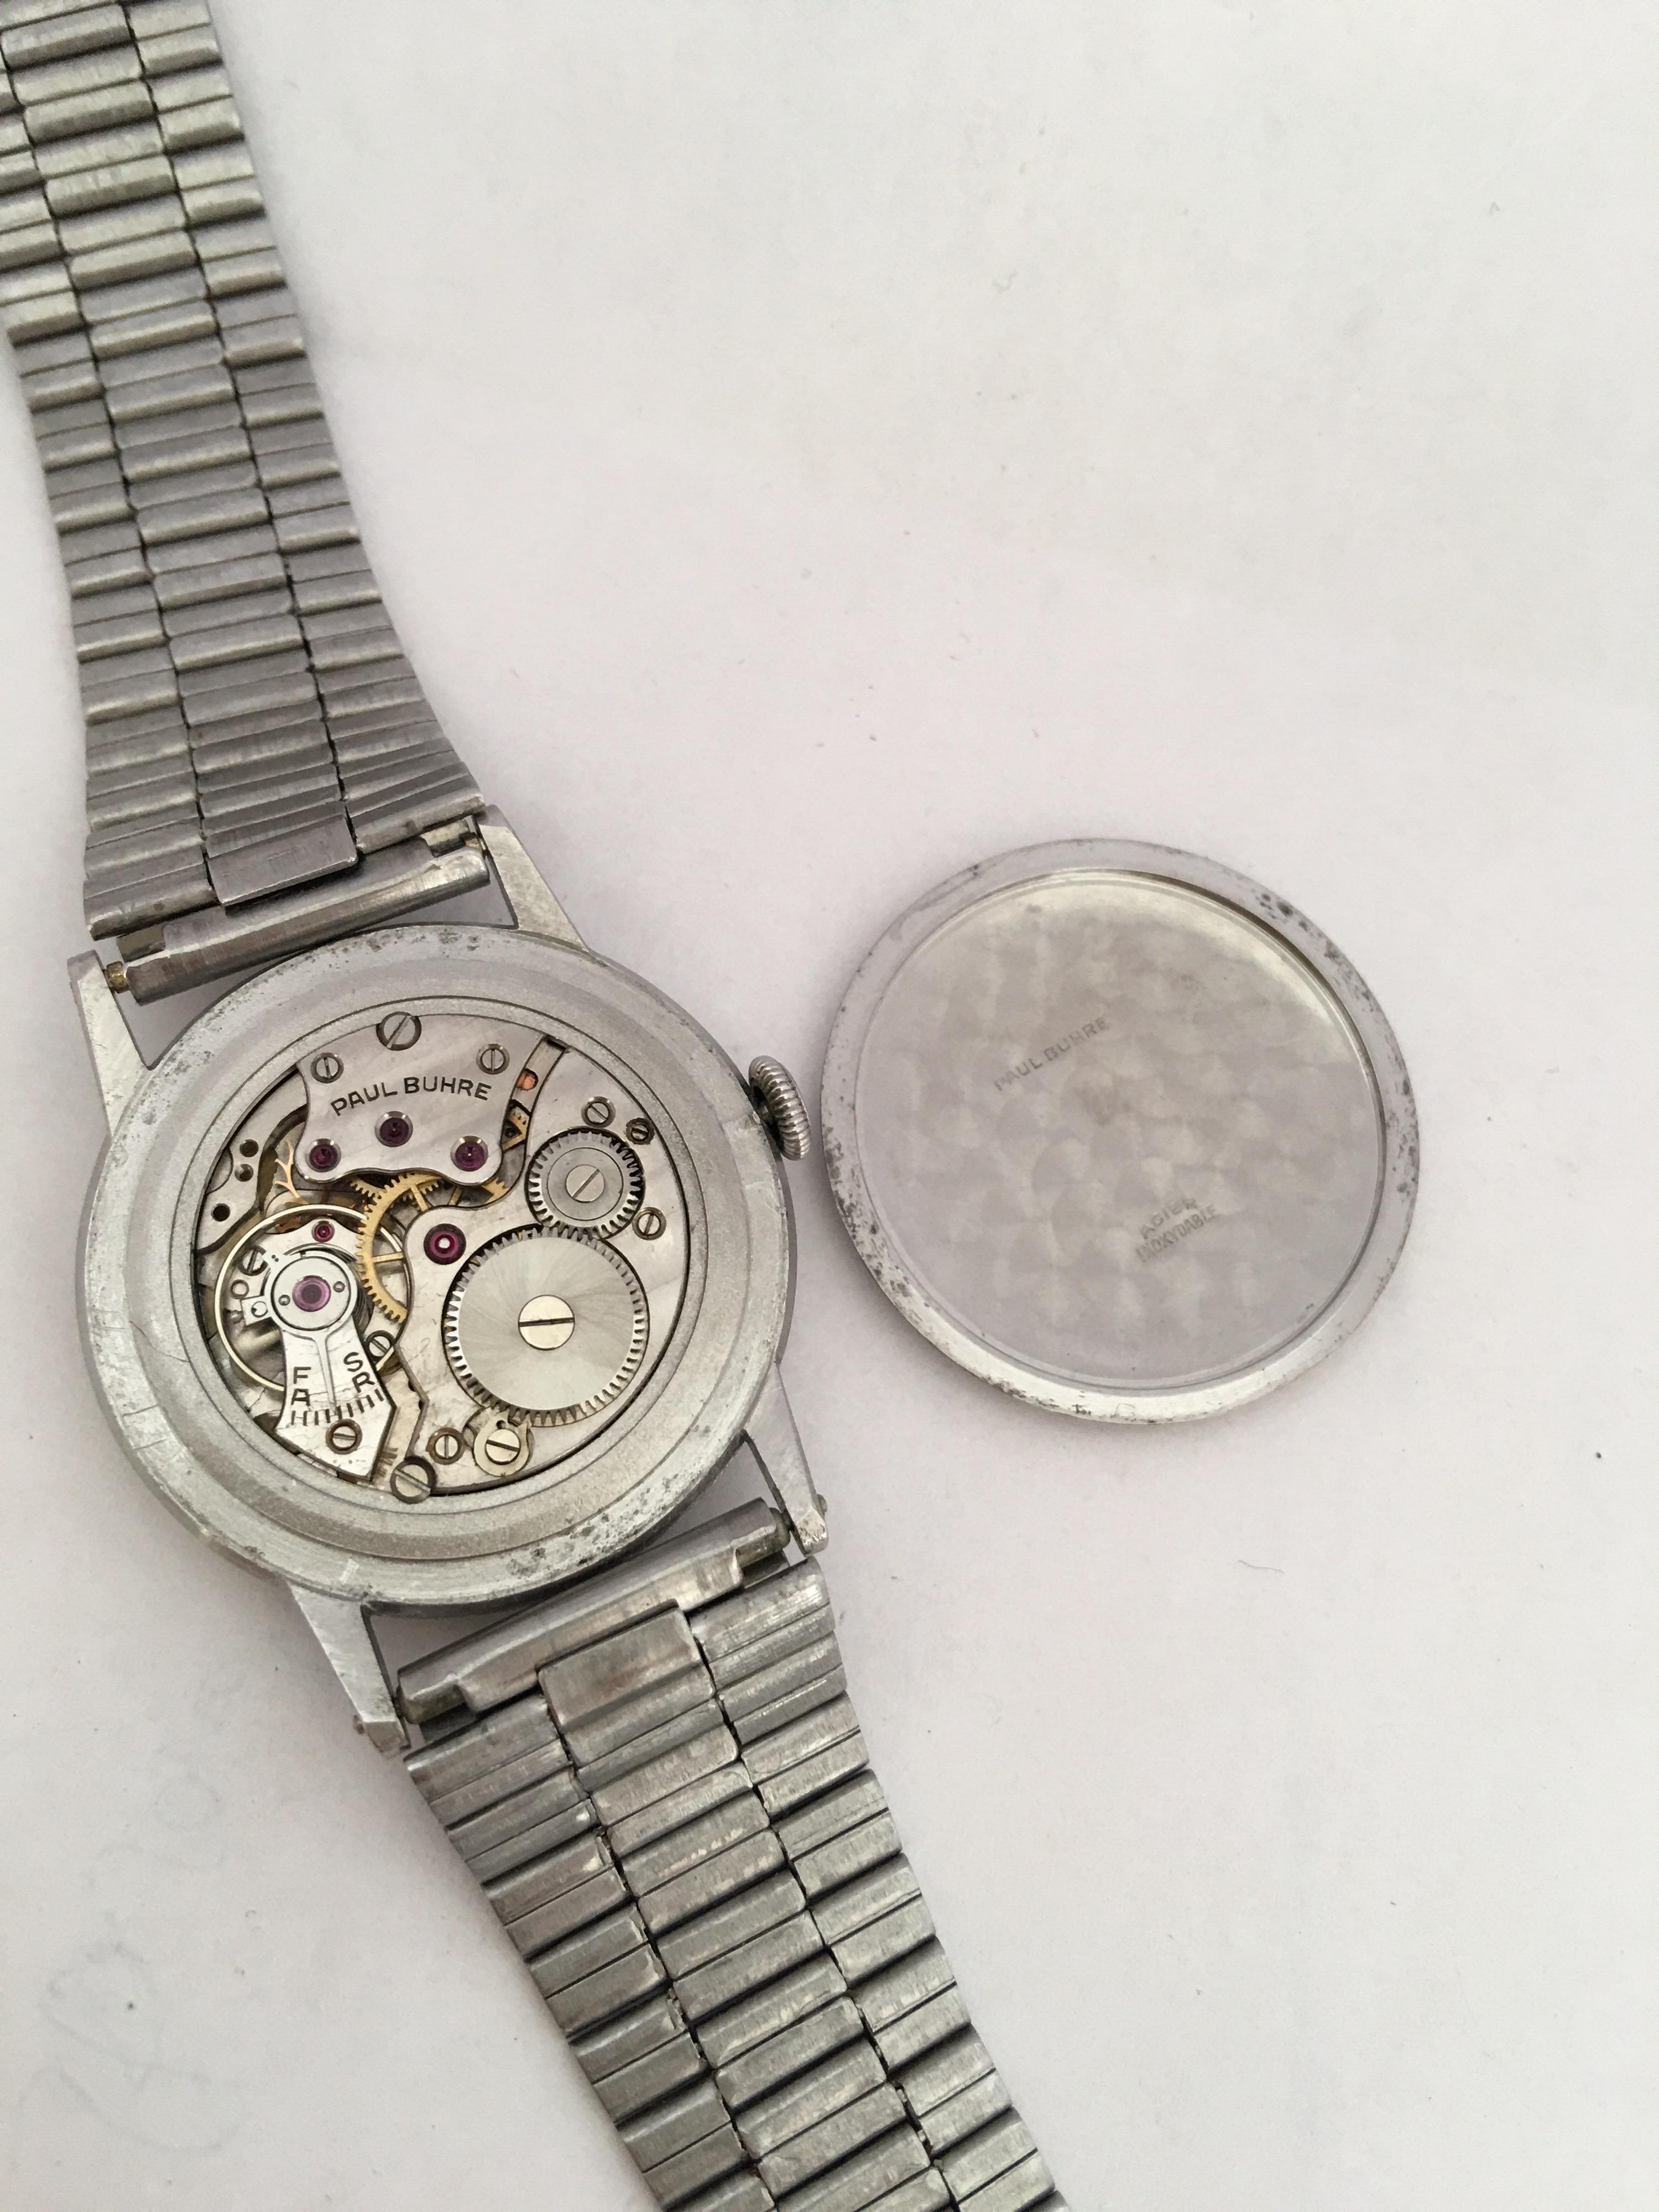 1960s Stainless Steel Manual Winding Paul Buhre Vintage Watch For Sale 1